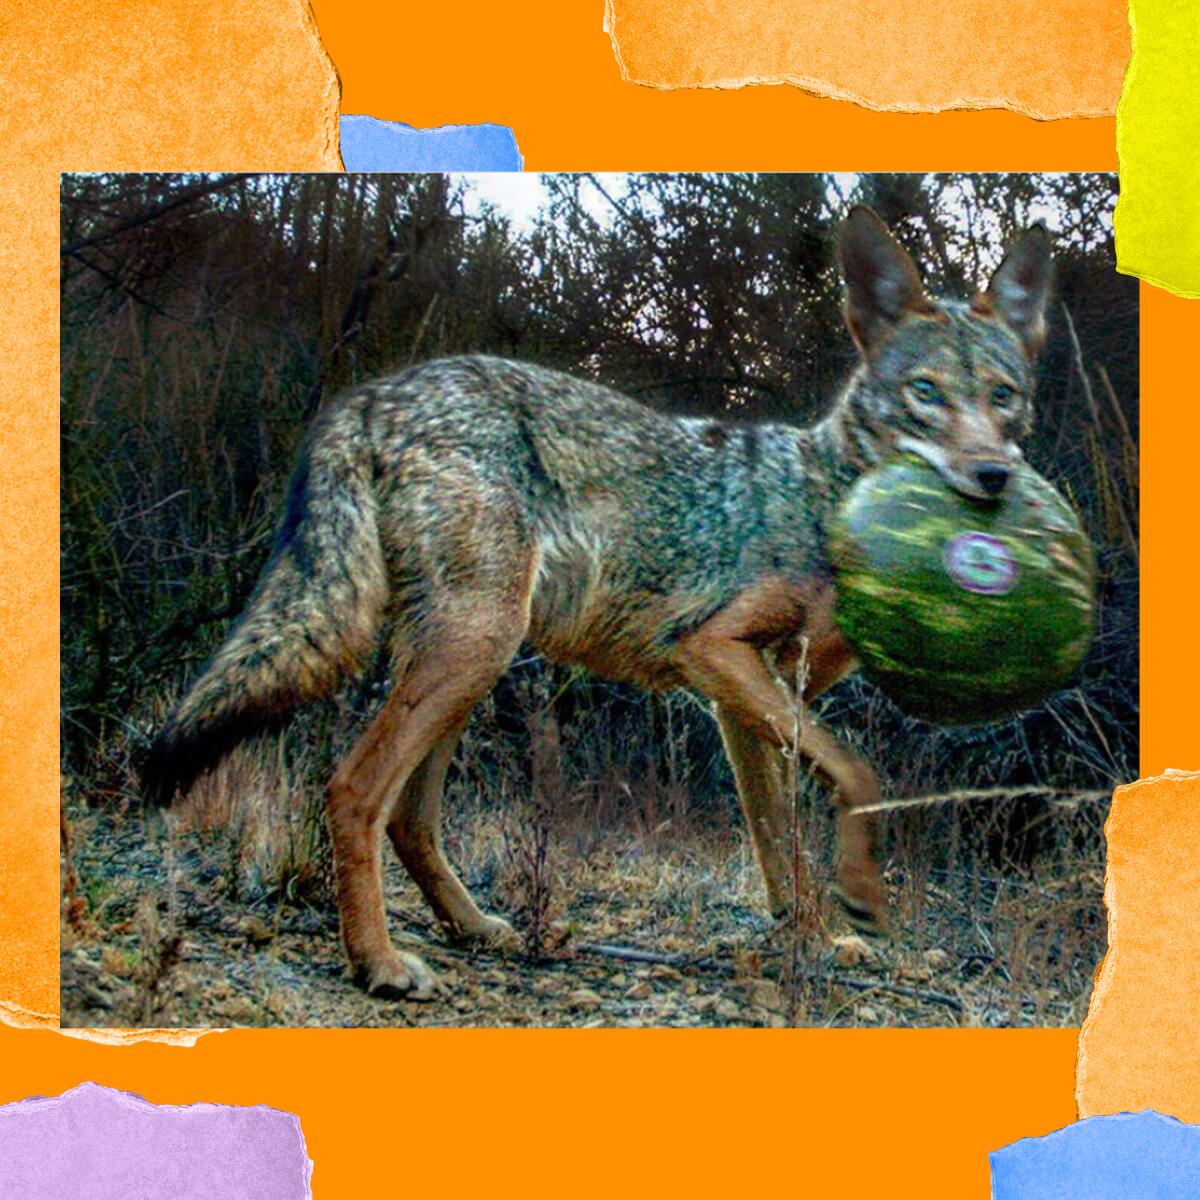 A coyote grips a melon in its jaws.